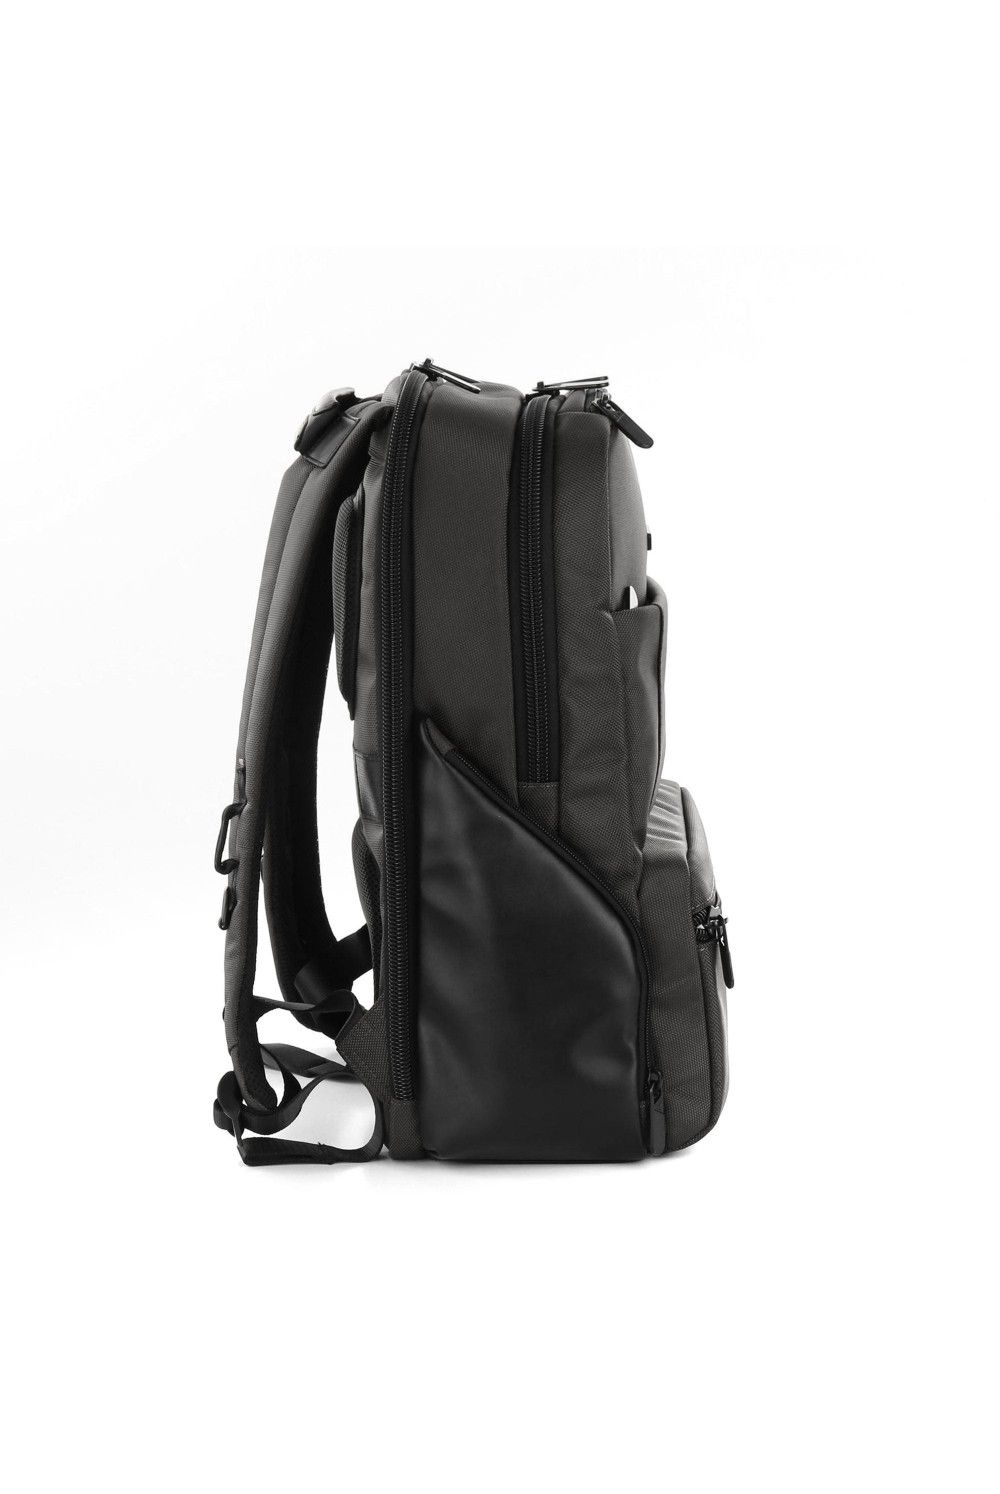 Roncato laptop backpack Agency 15.6 inches